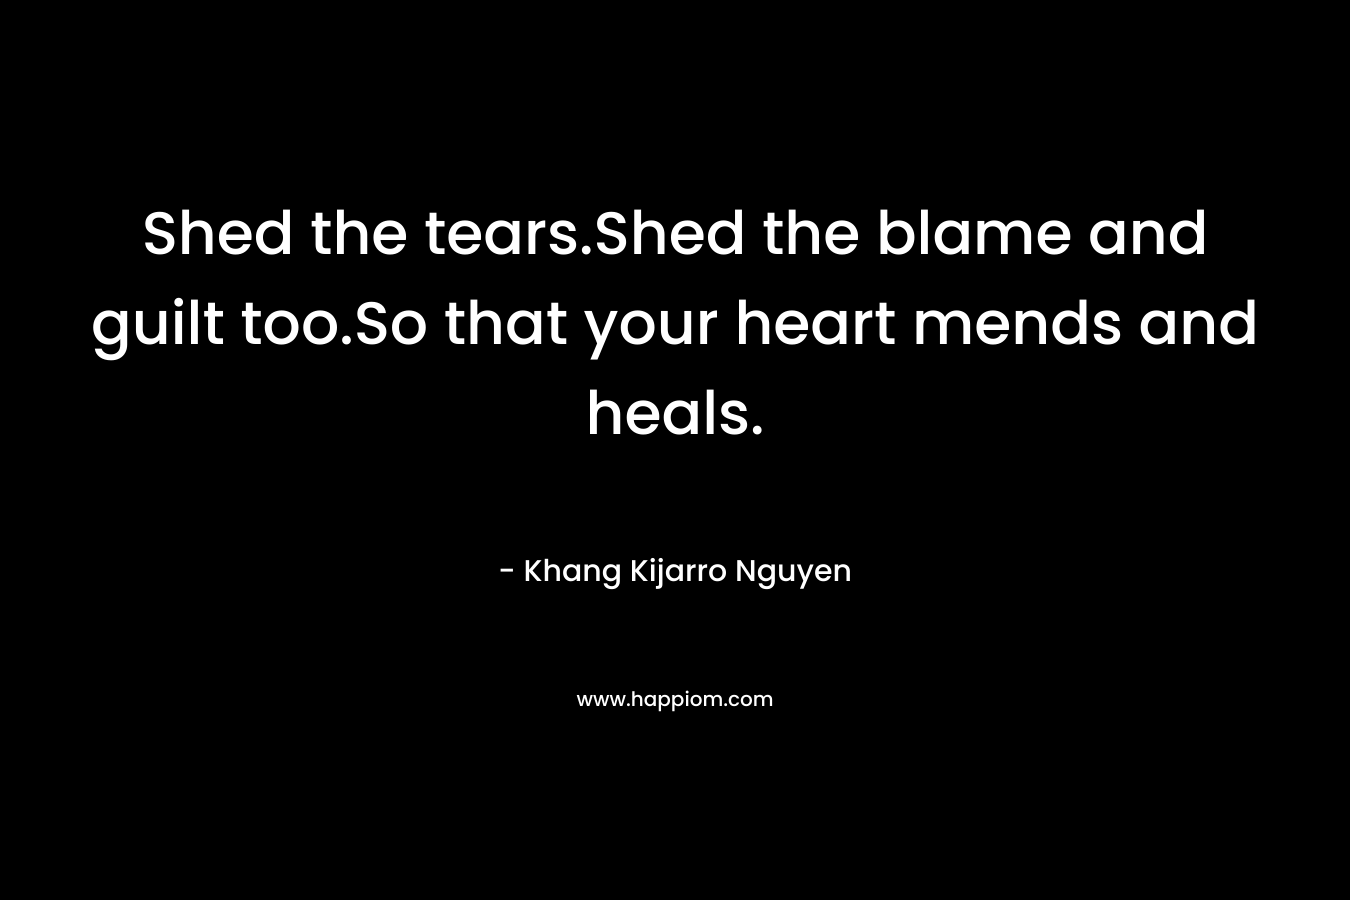 Shed the tears.Shed the blame and guilt too.So that your heart mends and heals.